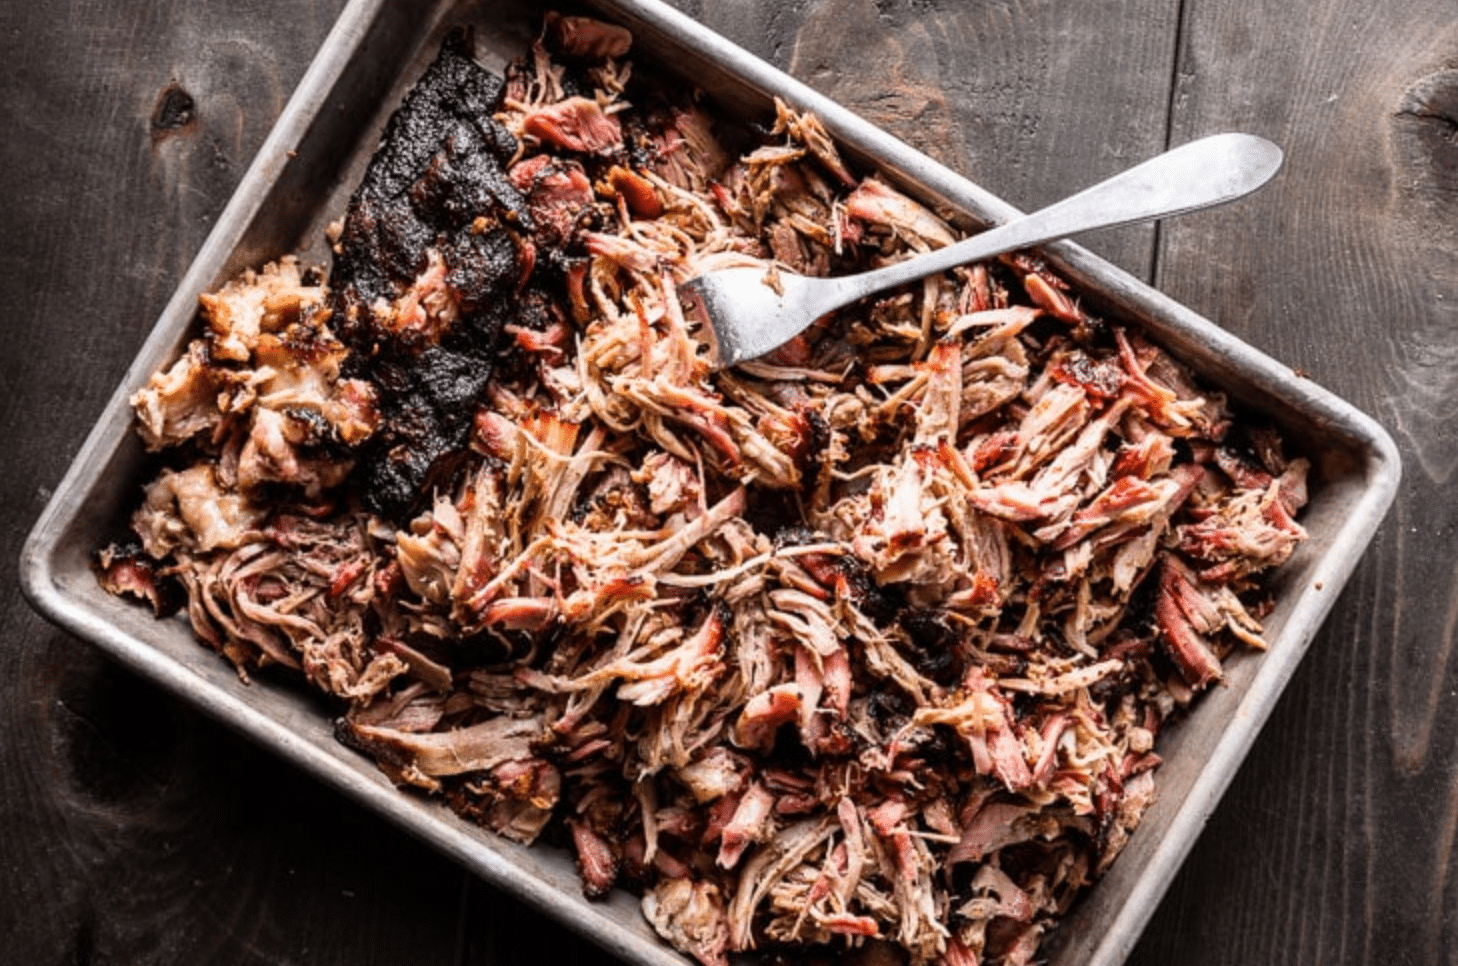 How To Make Smoked Pulled Pork